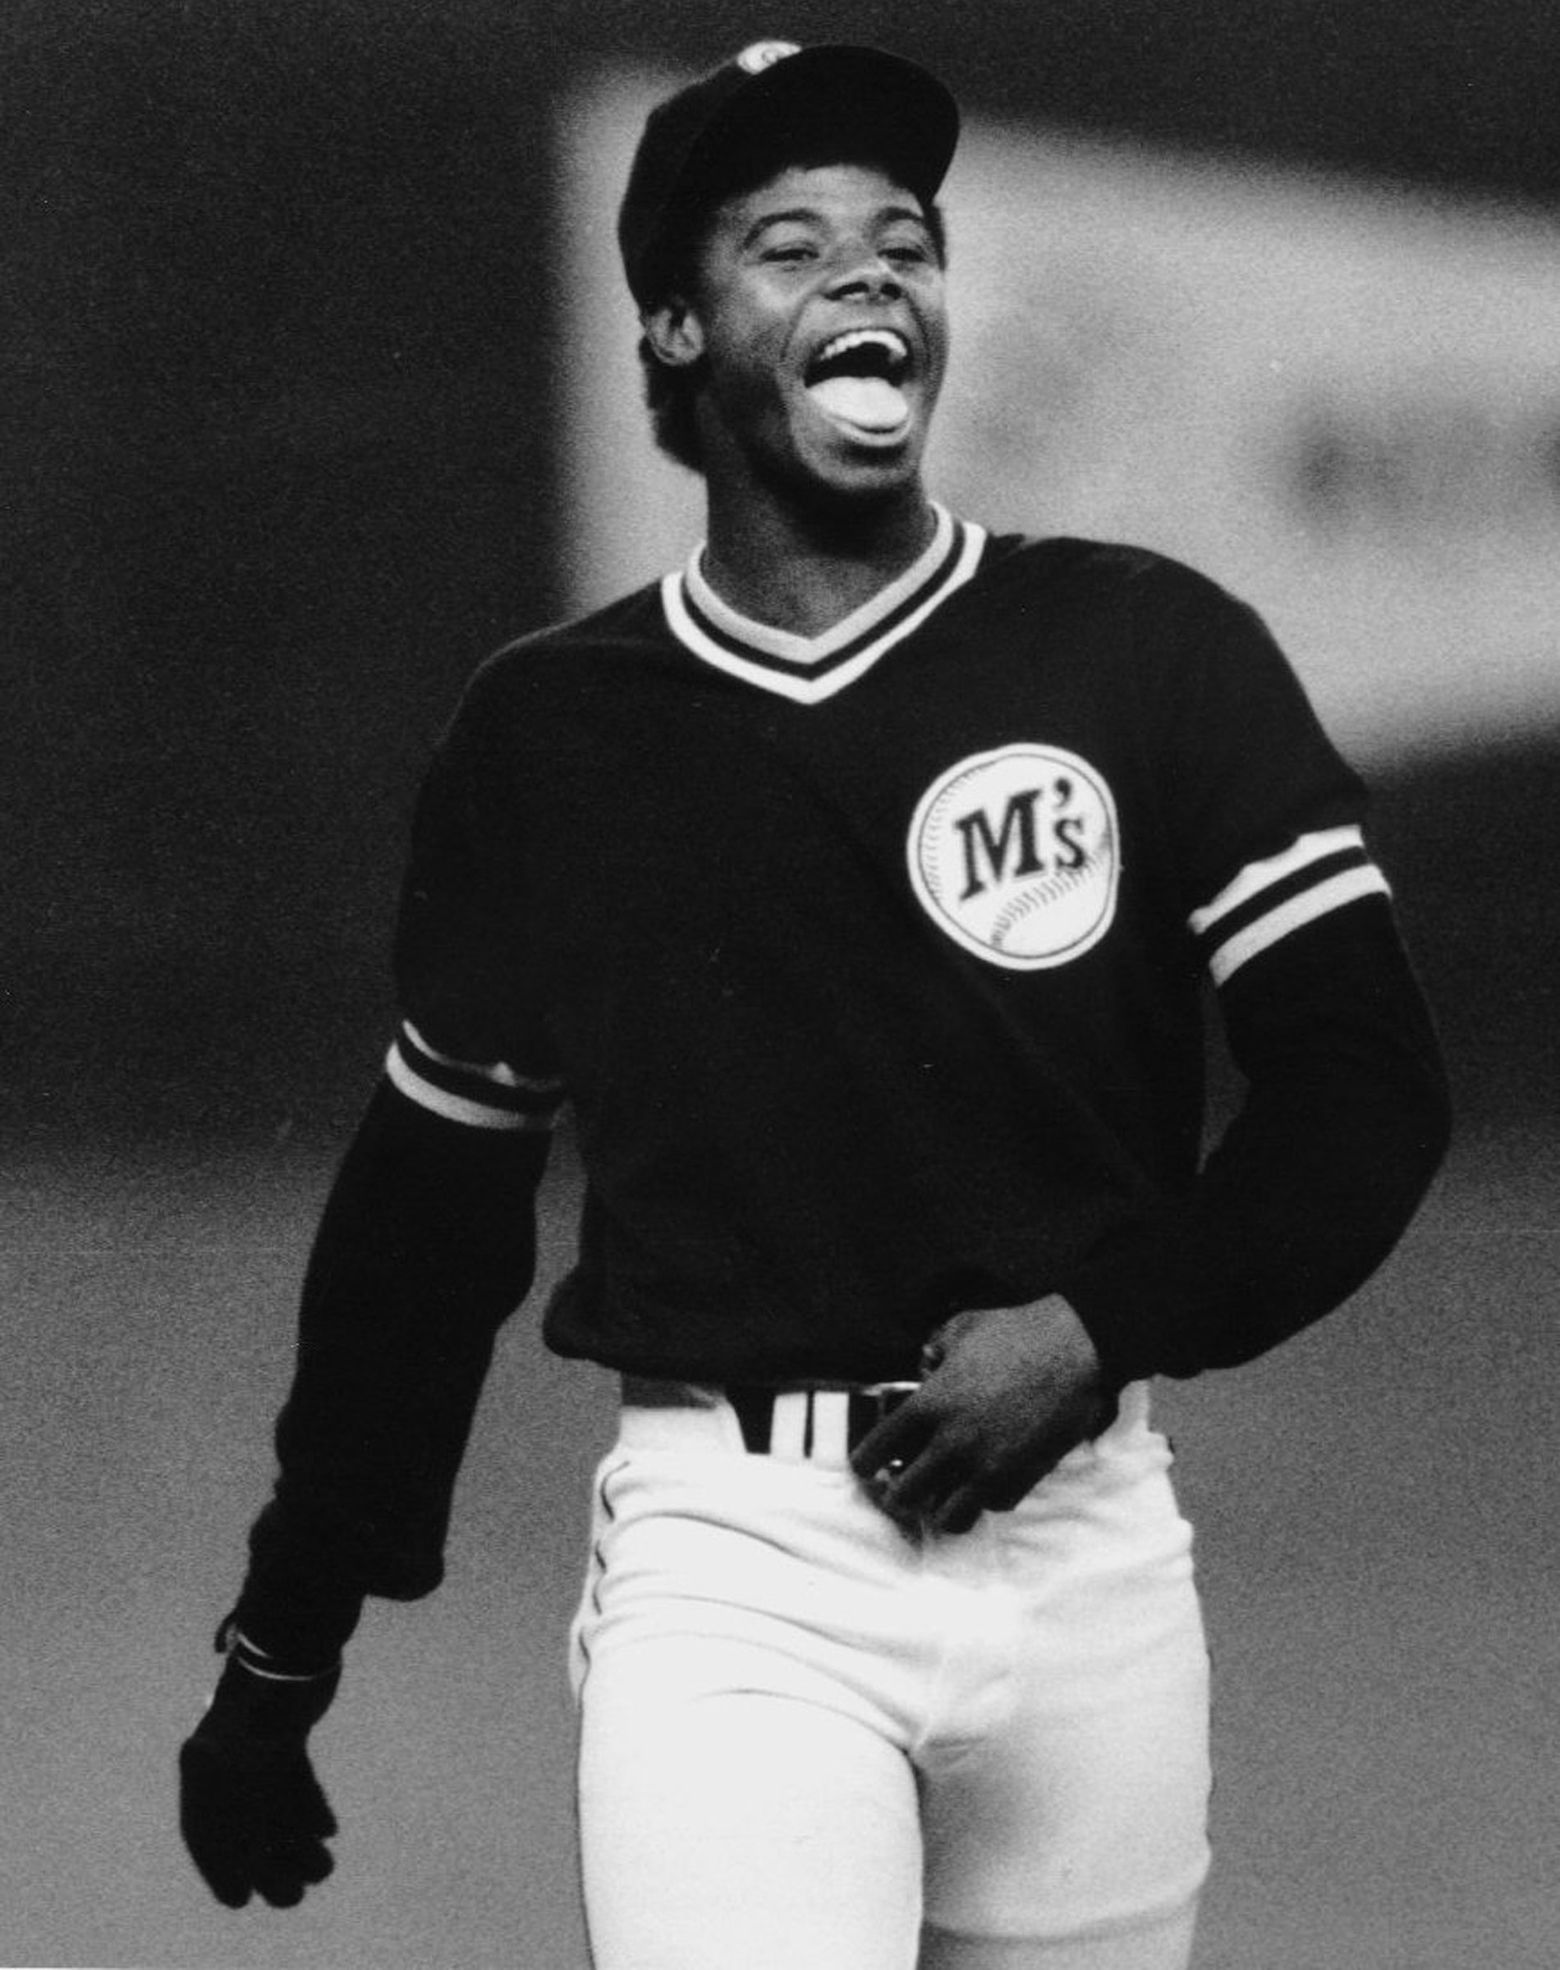 Not in Hall of Fame - 38. Ken Griffey Sr.